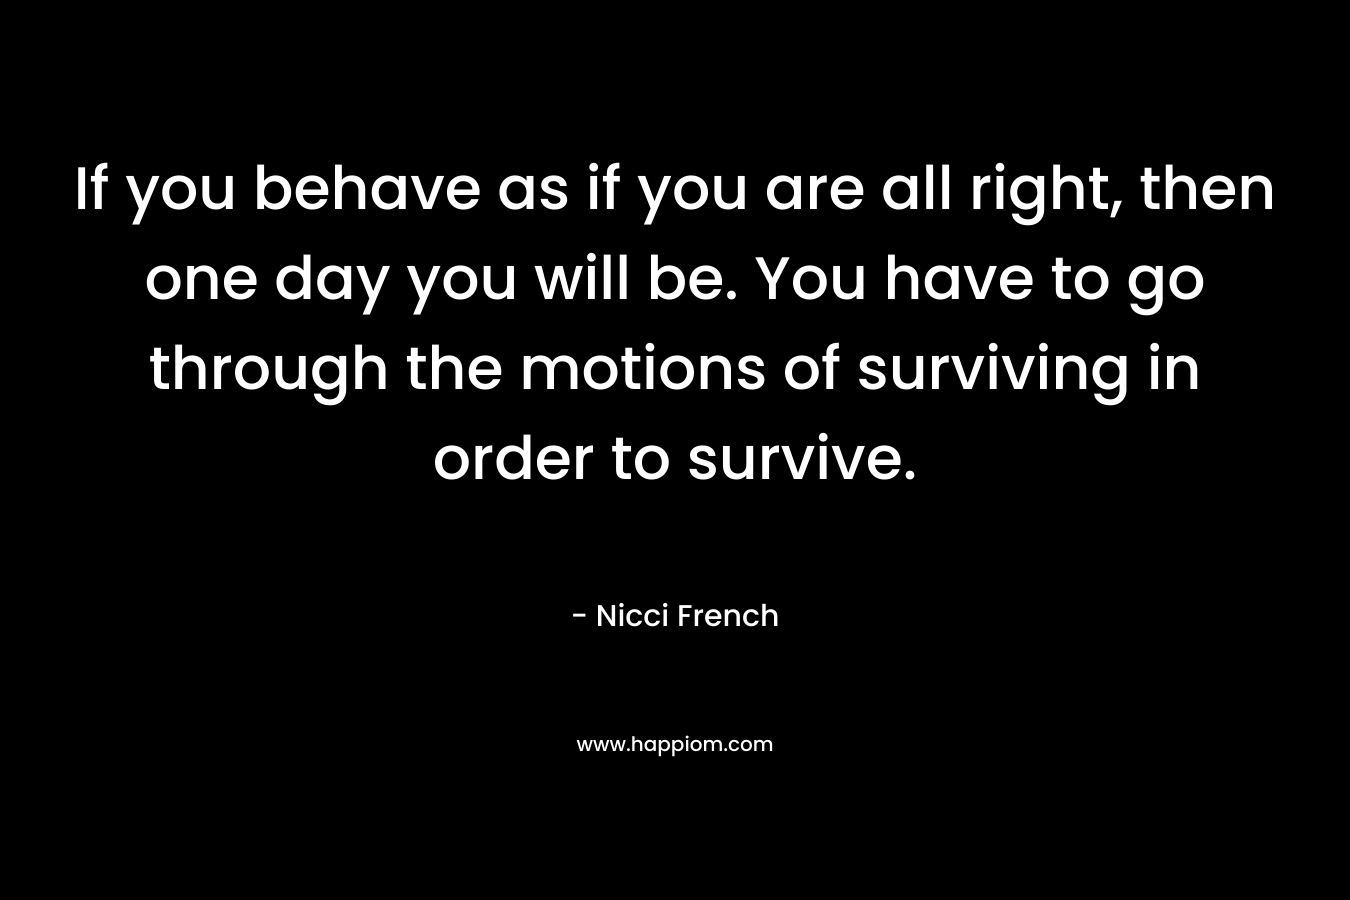 If you behave as if you are all right, then one day you will be. You have to go through the motions of surviving in order to survive. – Nicci French